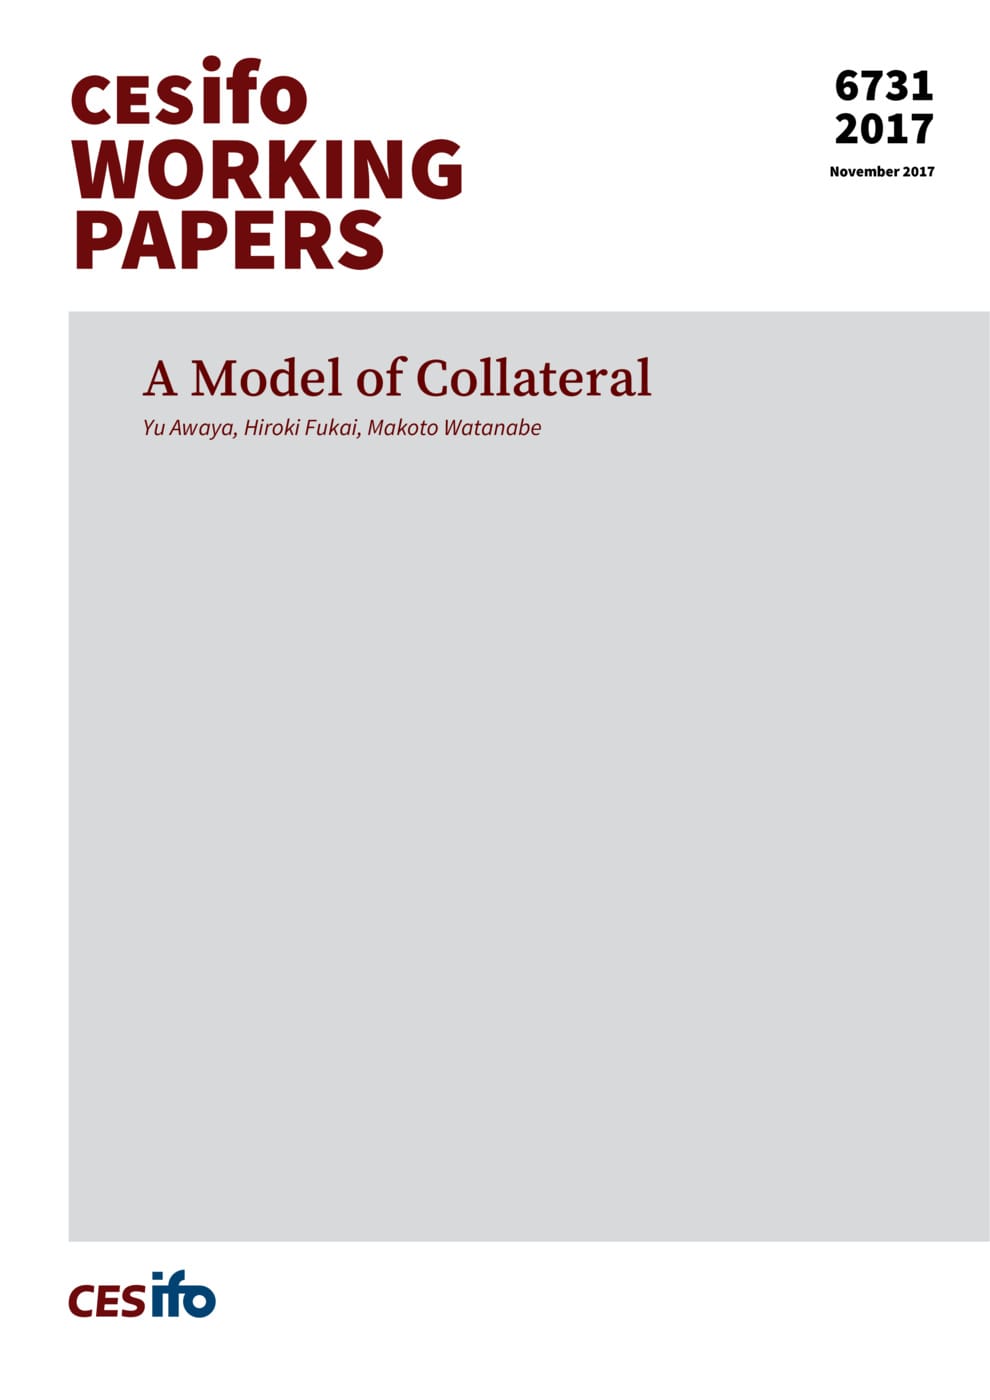 A Model Of Collateral Publication Cesifo